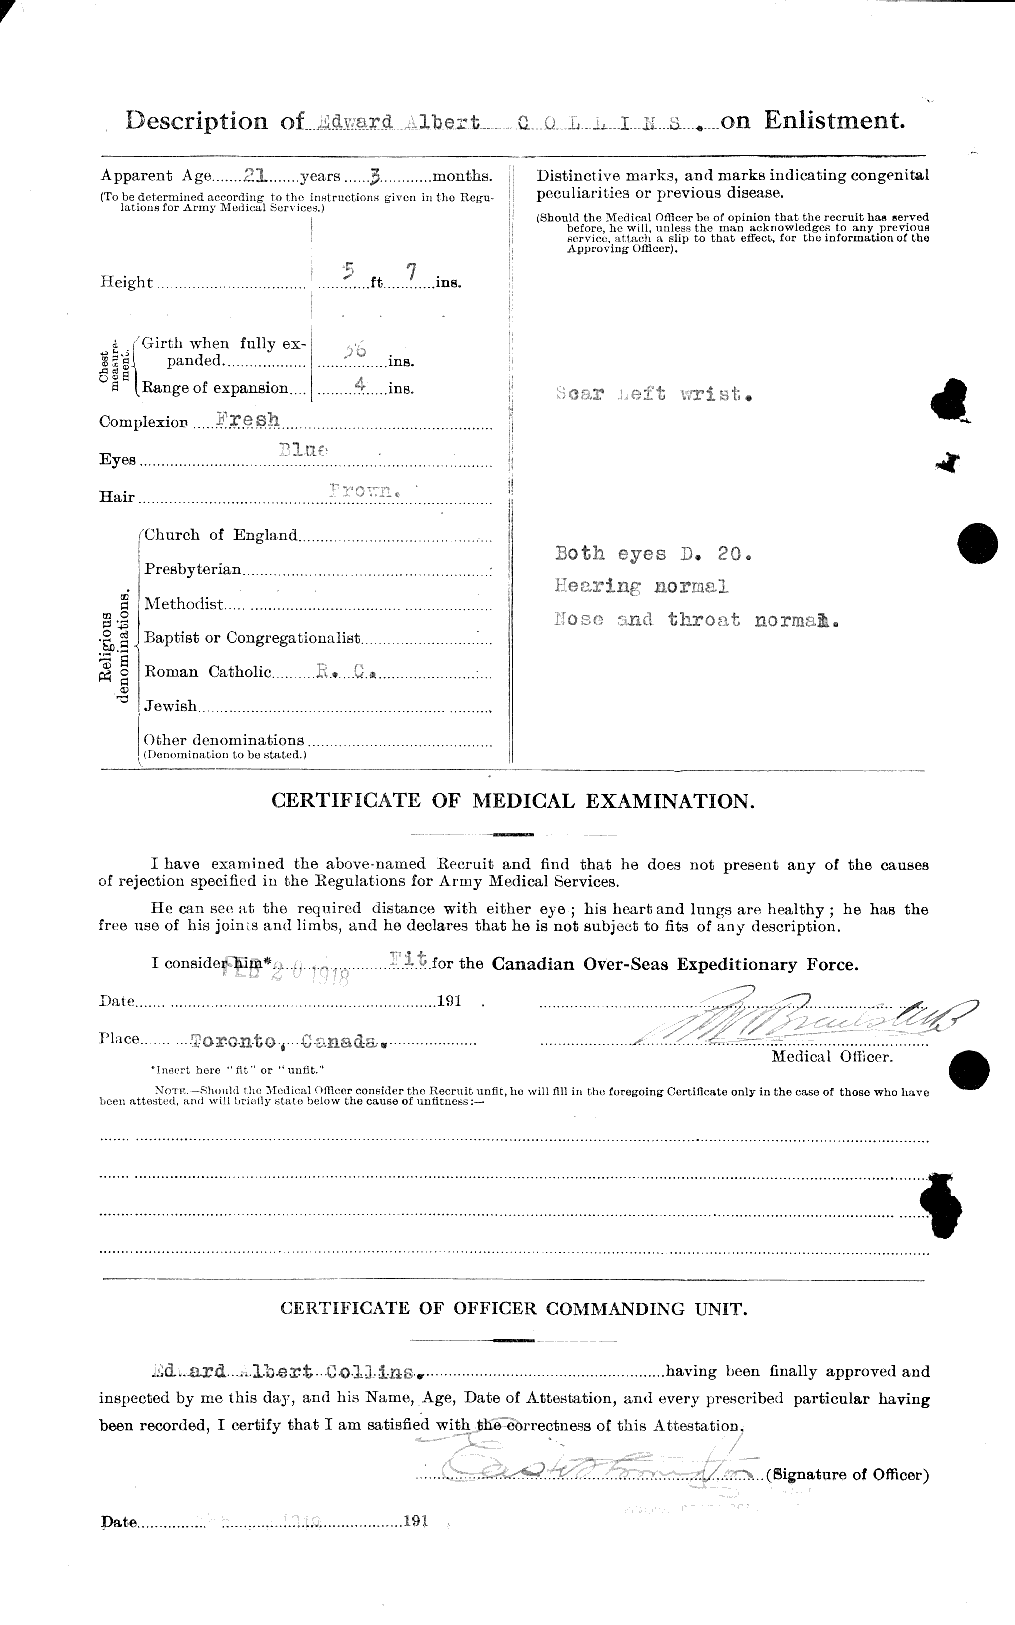 Personnel Records of the First World War - CEF 037745b